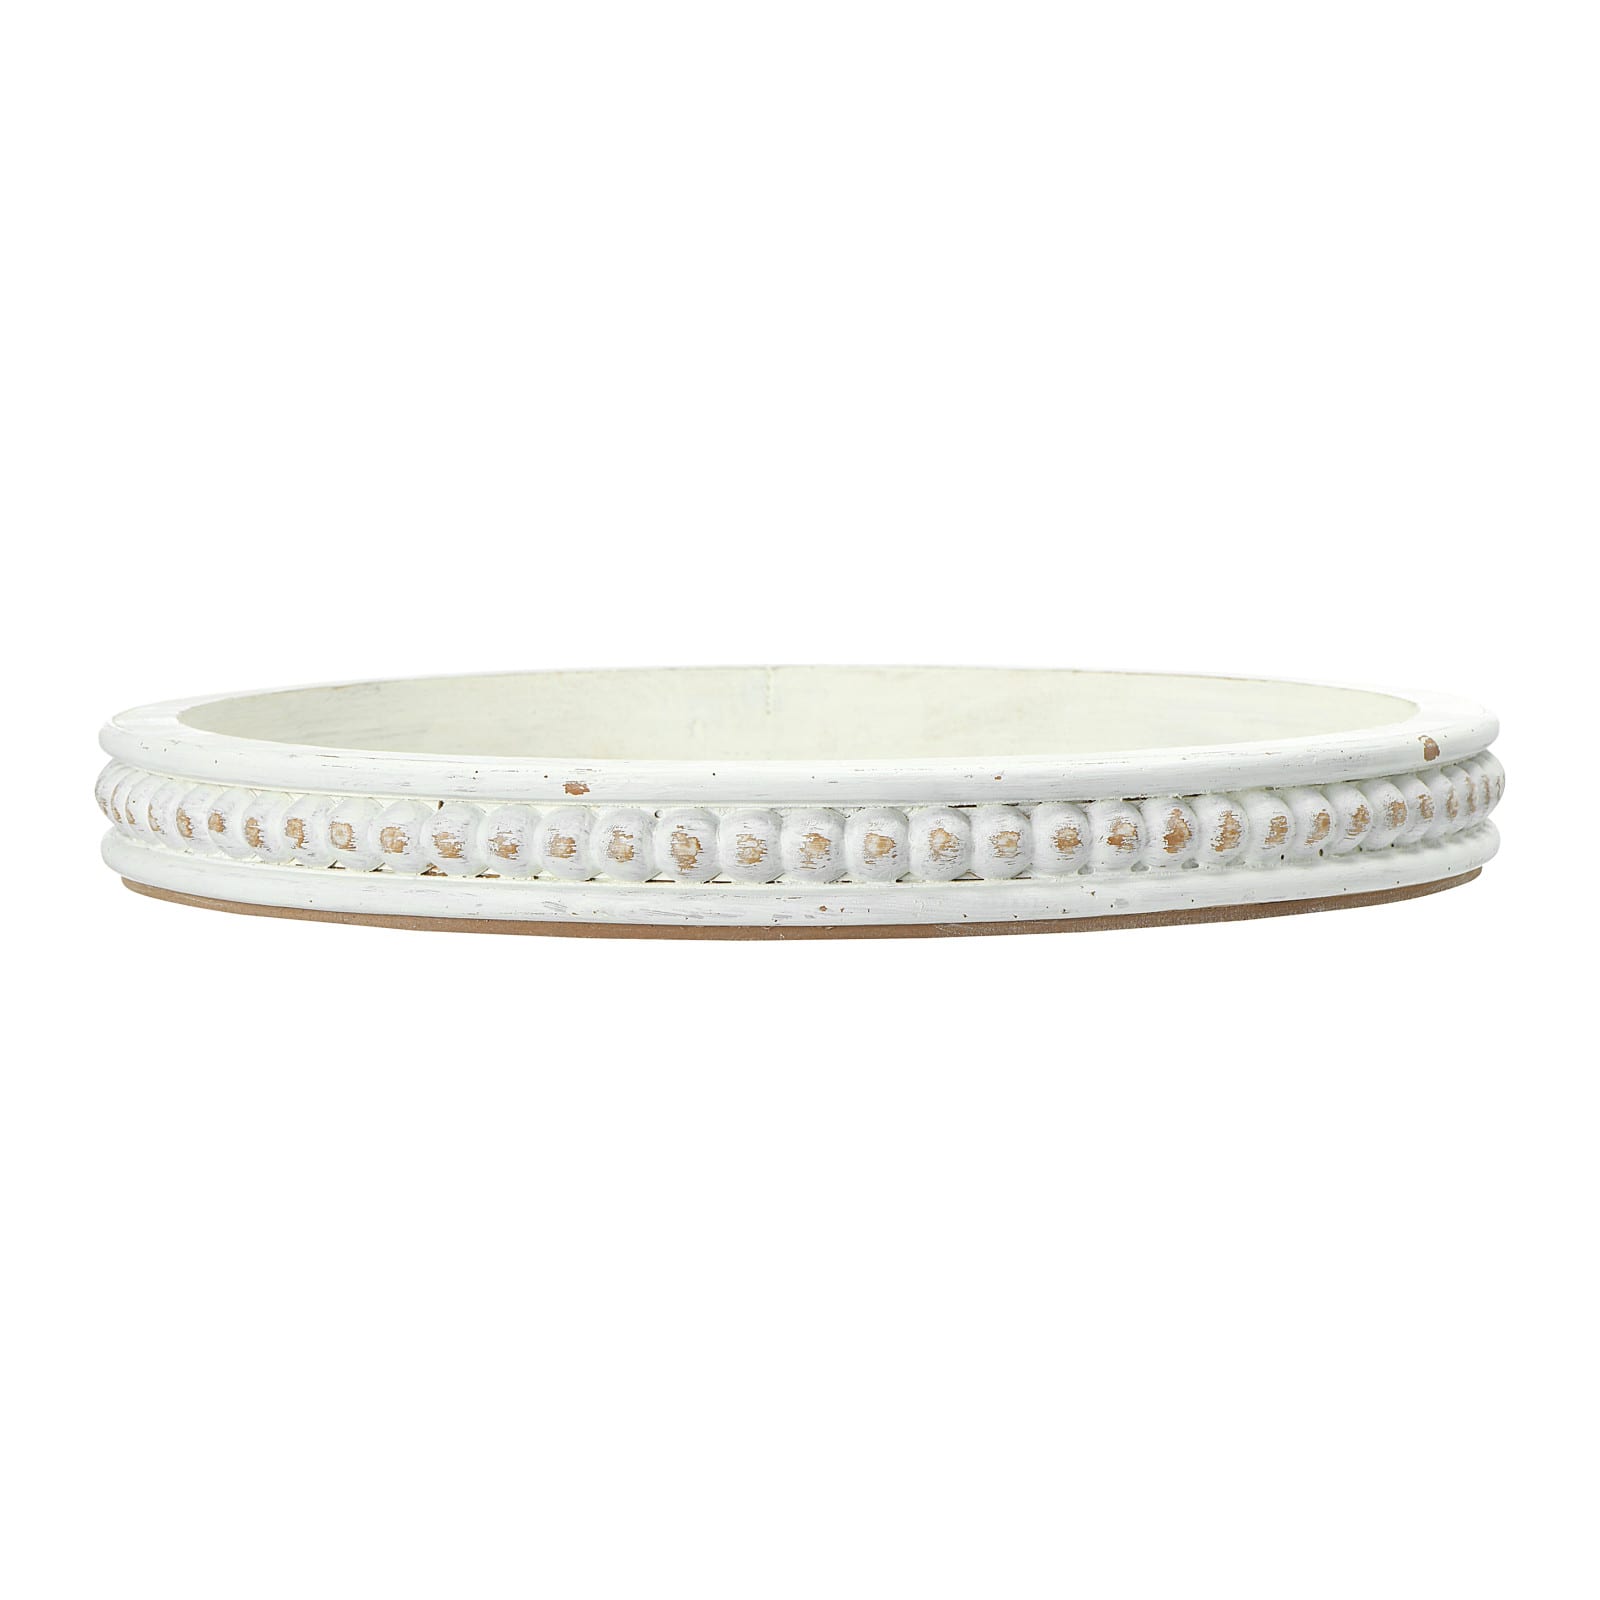 16" Decorative Round Wood Tray with Hobnail Edge